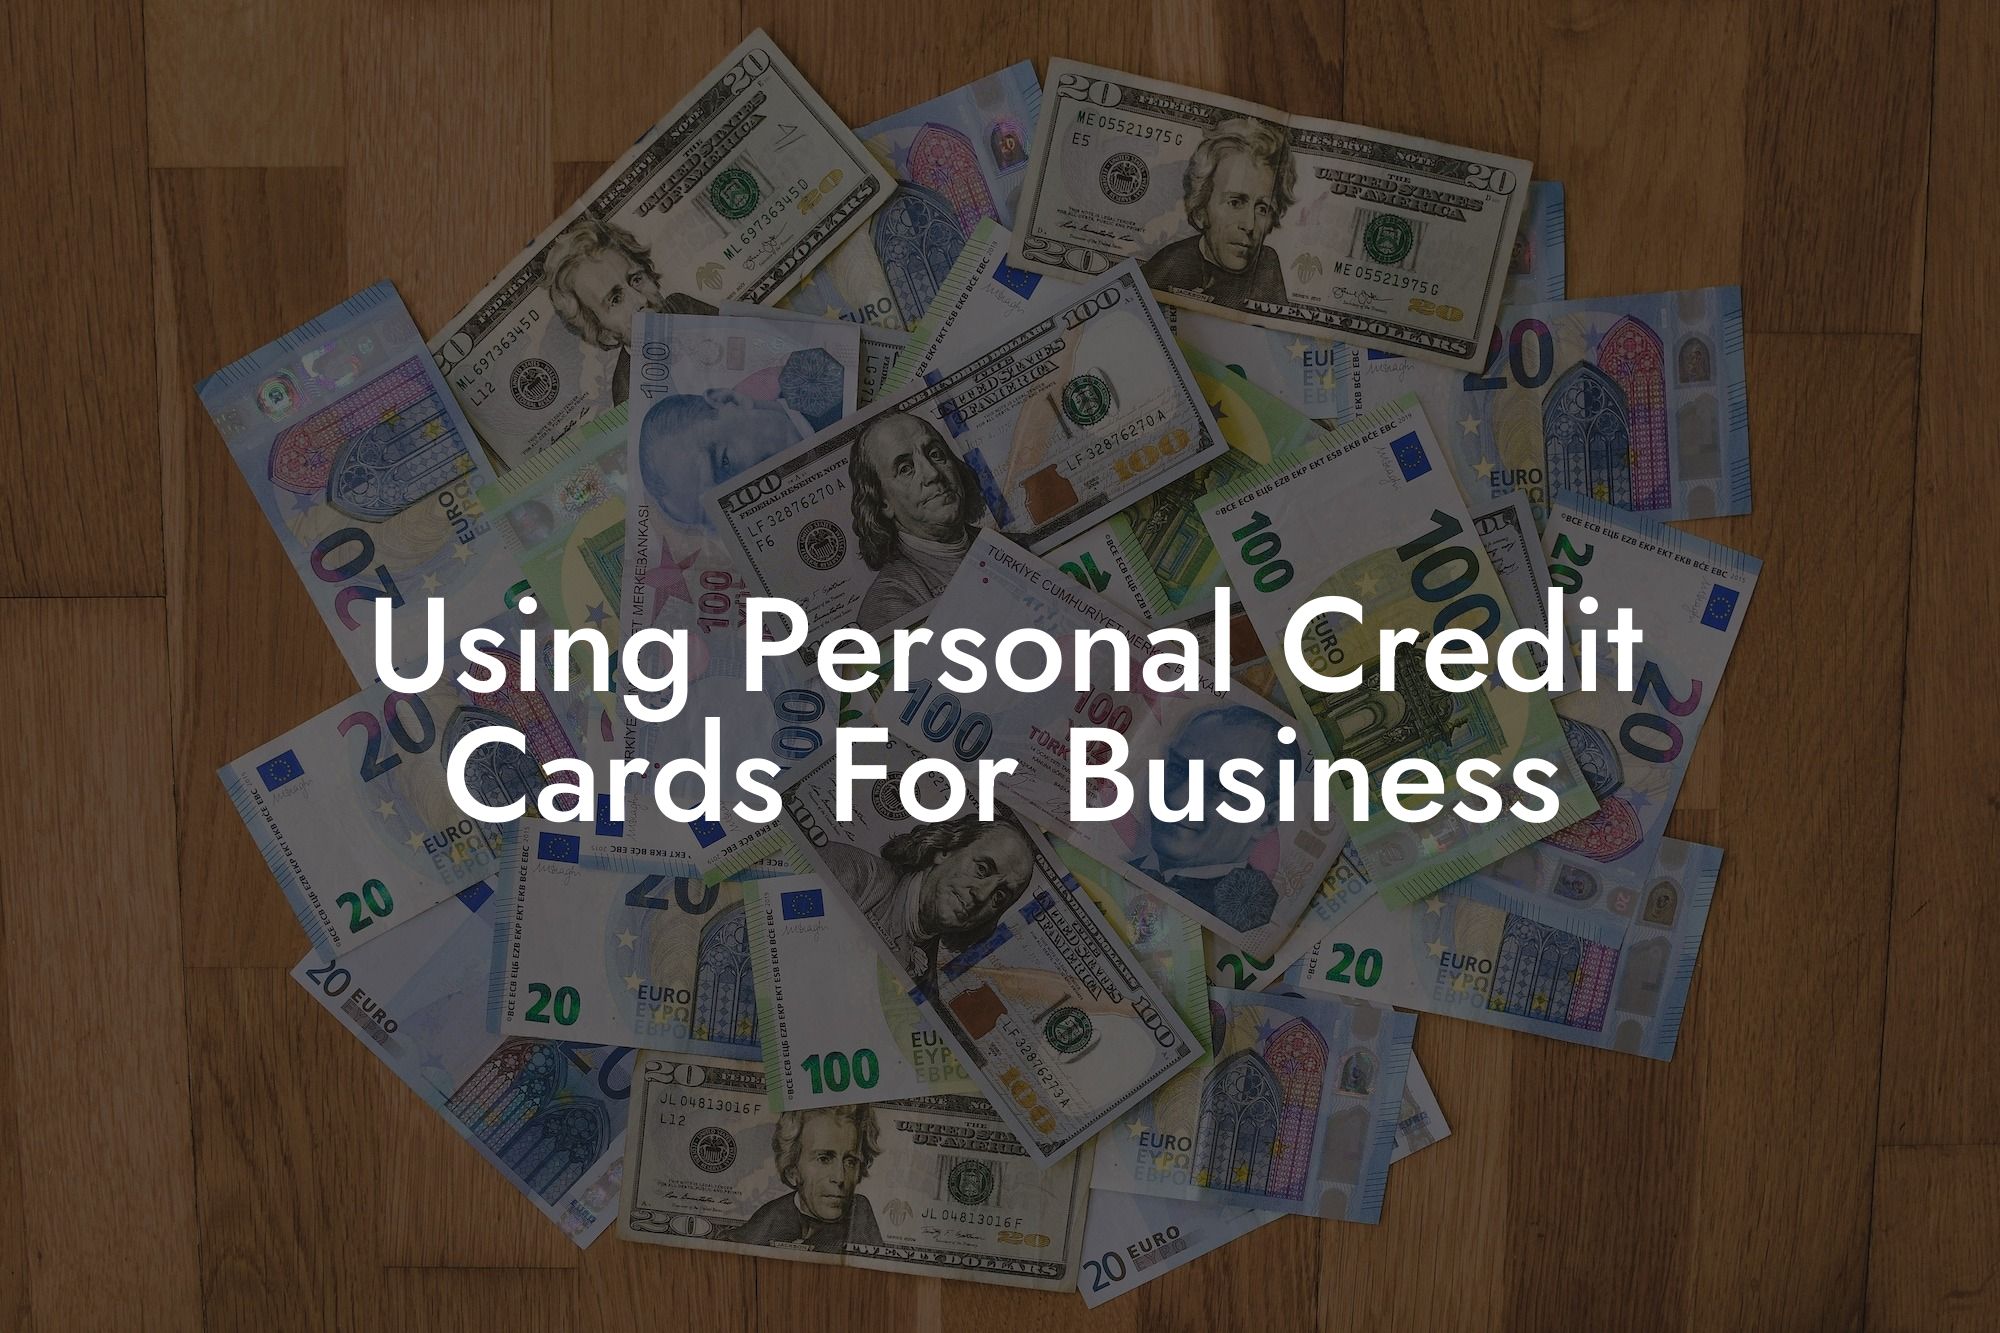 Using Personal Credit Cards For Business